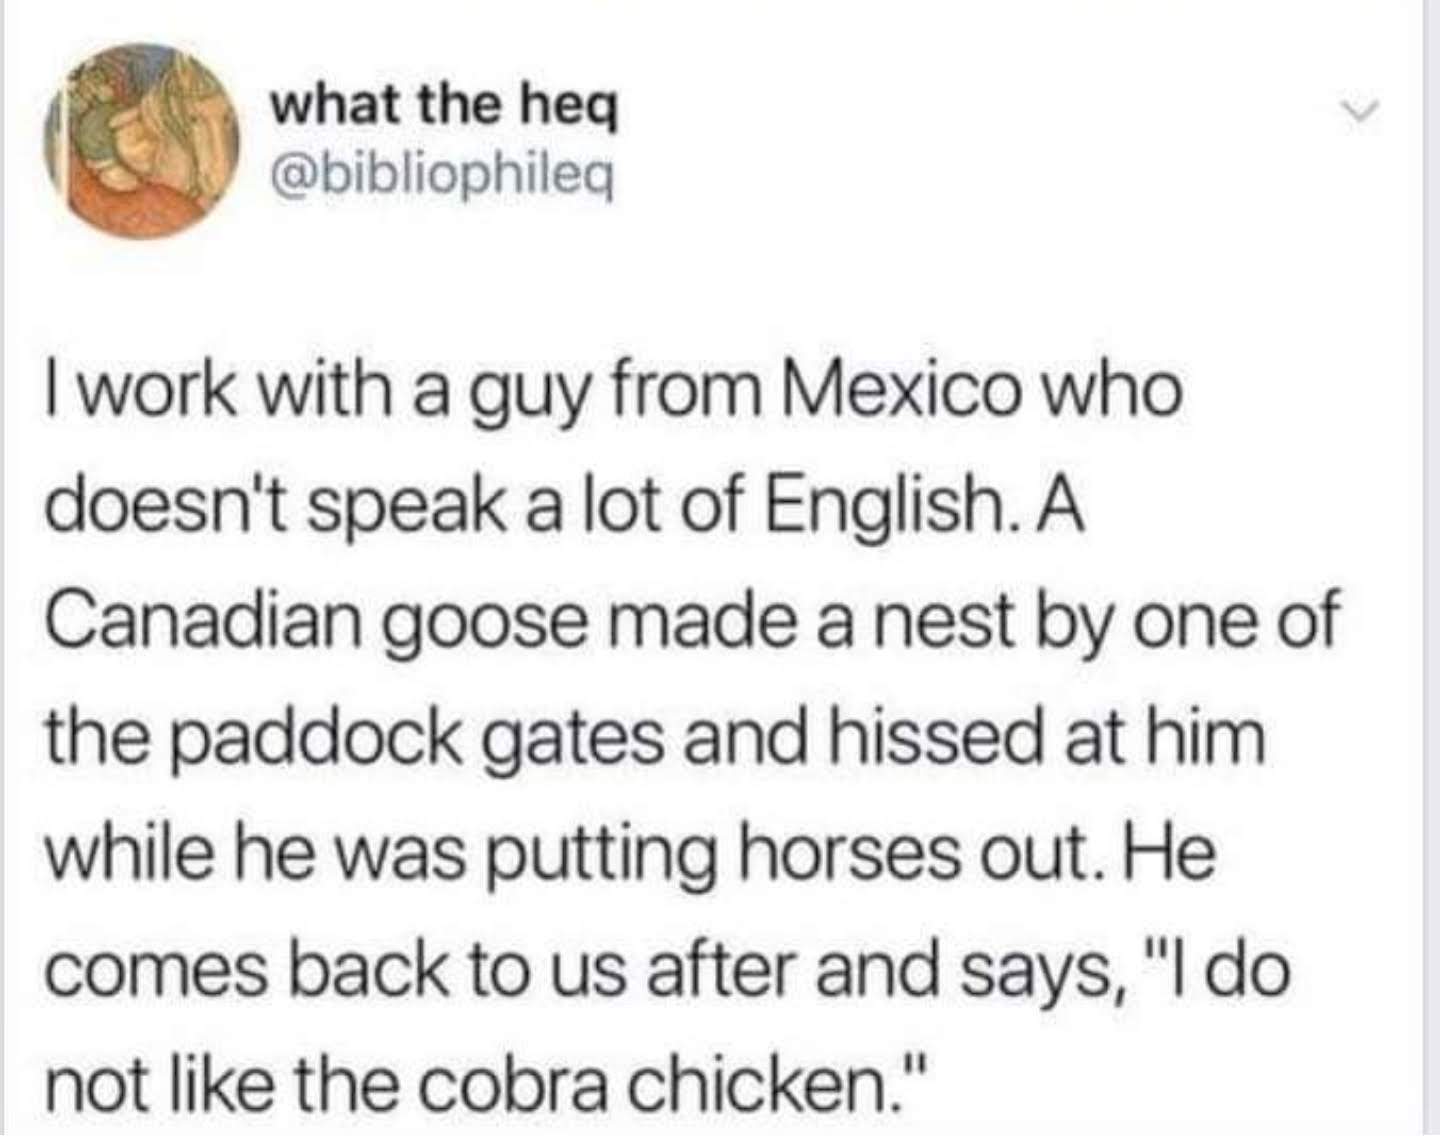 document - what the heq I work with a guy from Mexico who doesn't speak a lot of English. A Canadian goose made a nest by one of the paddock gates and hissed at him while he was putting horses out. He comes back to us after and says, "I do not the cobra c